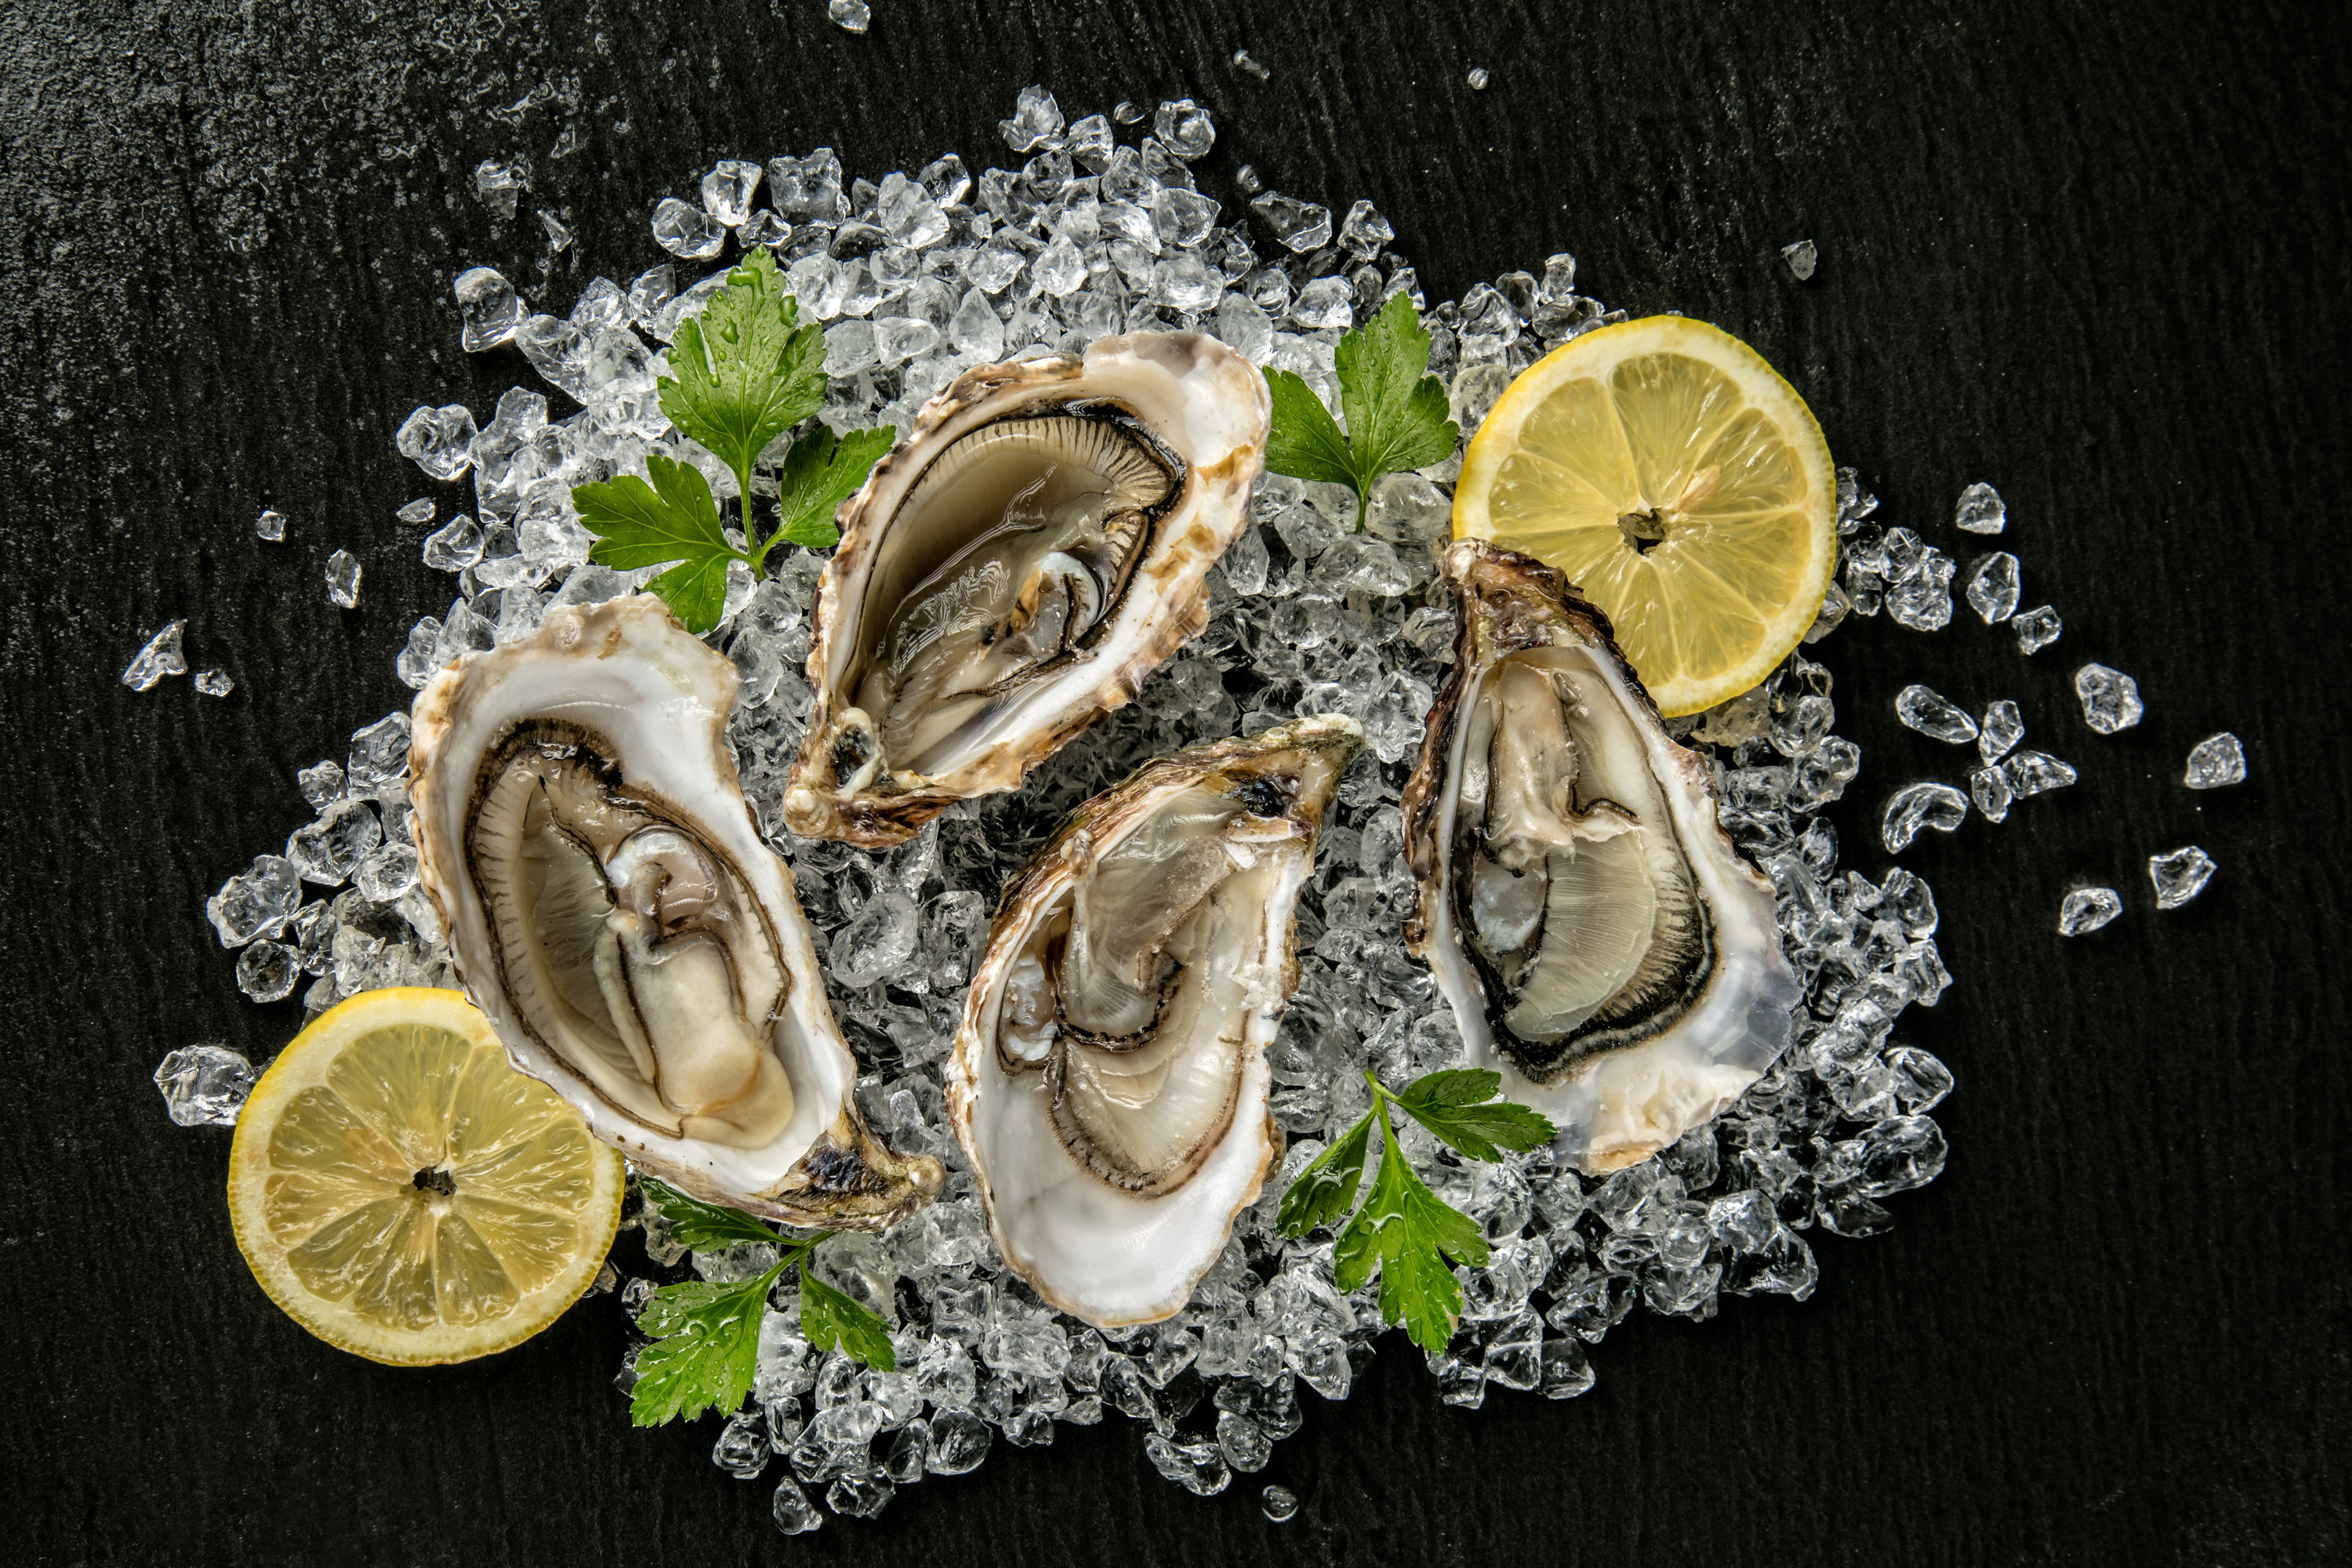 Oysters on ice with lemons